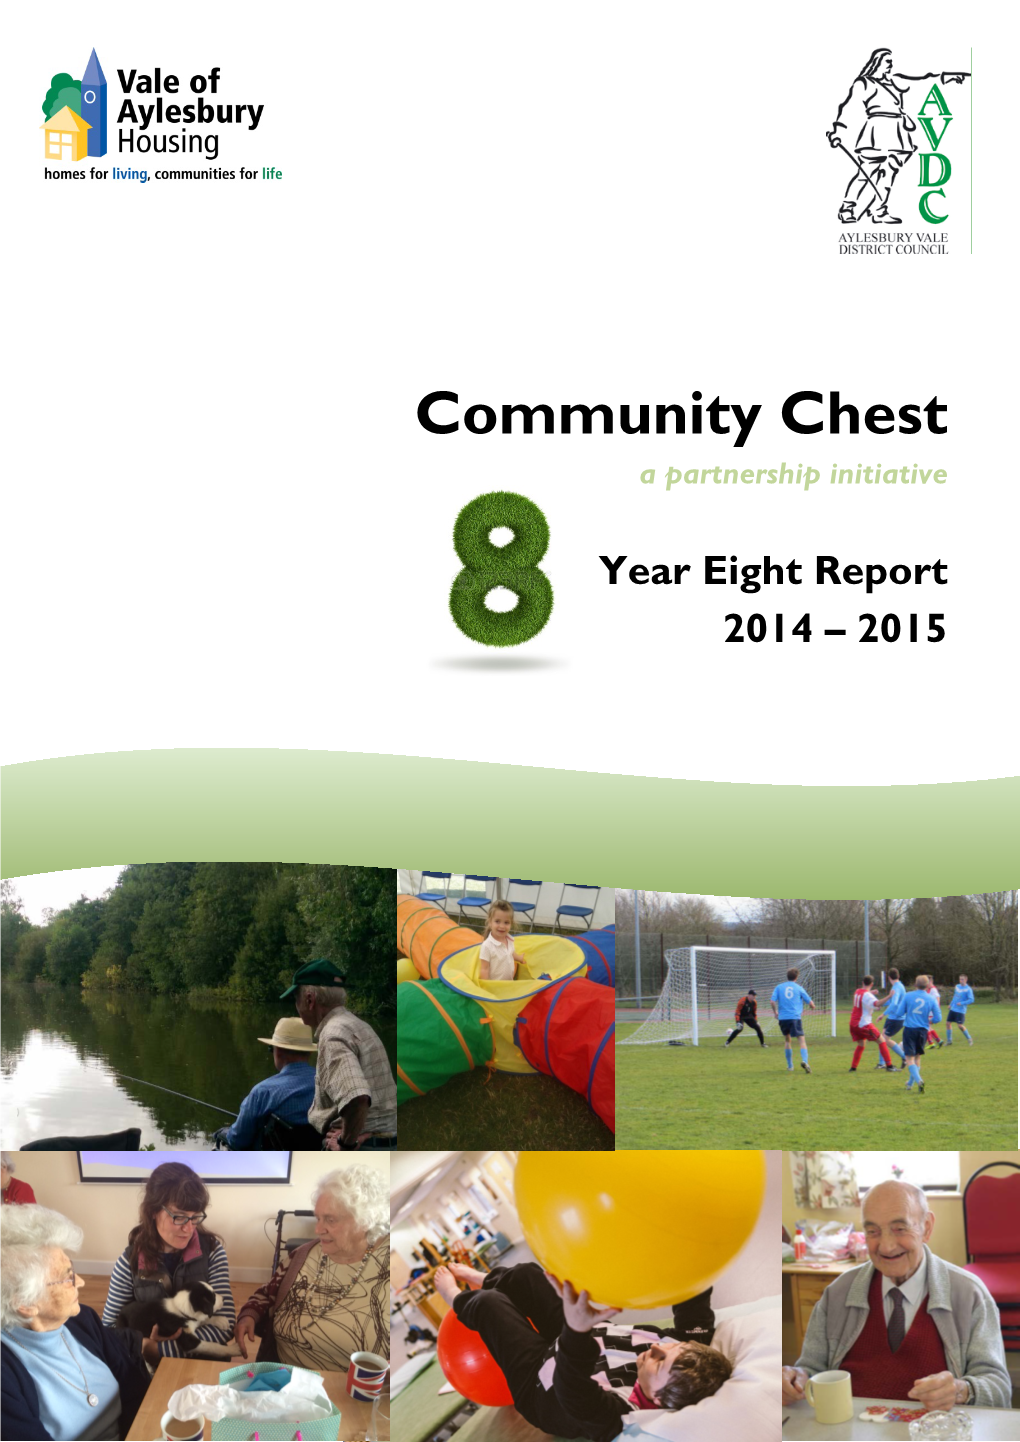 Please Find Enclosed a Summary Leaflet for the New Community